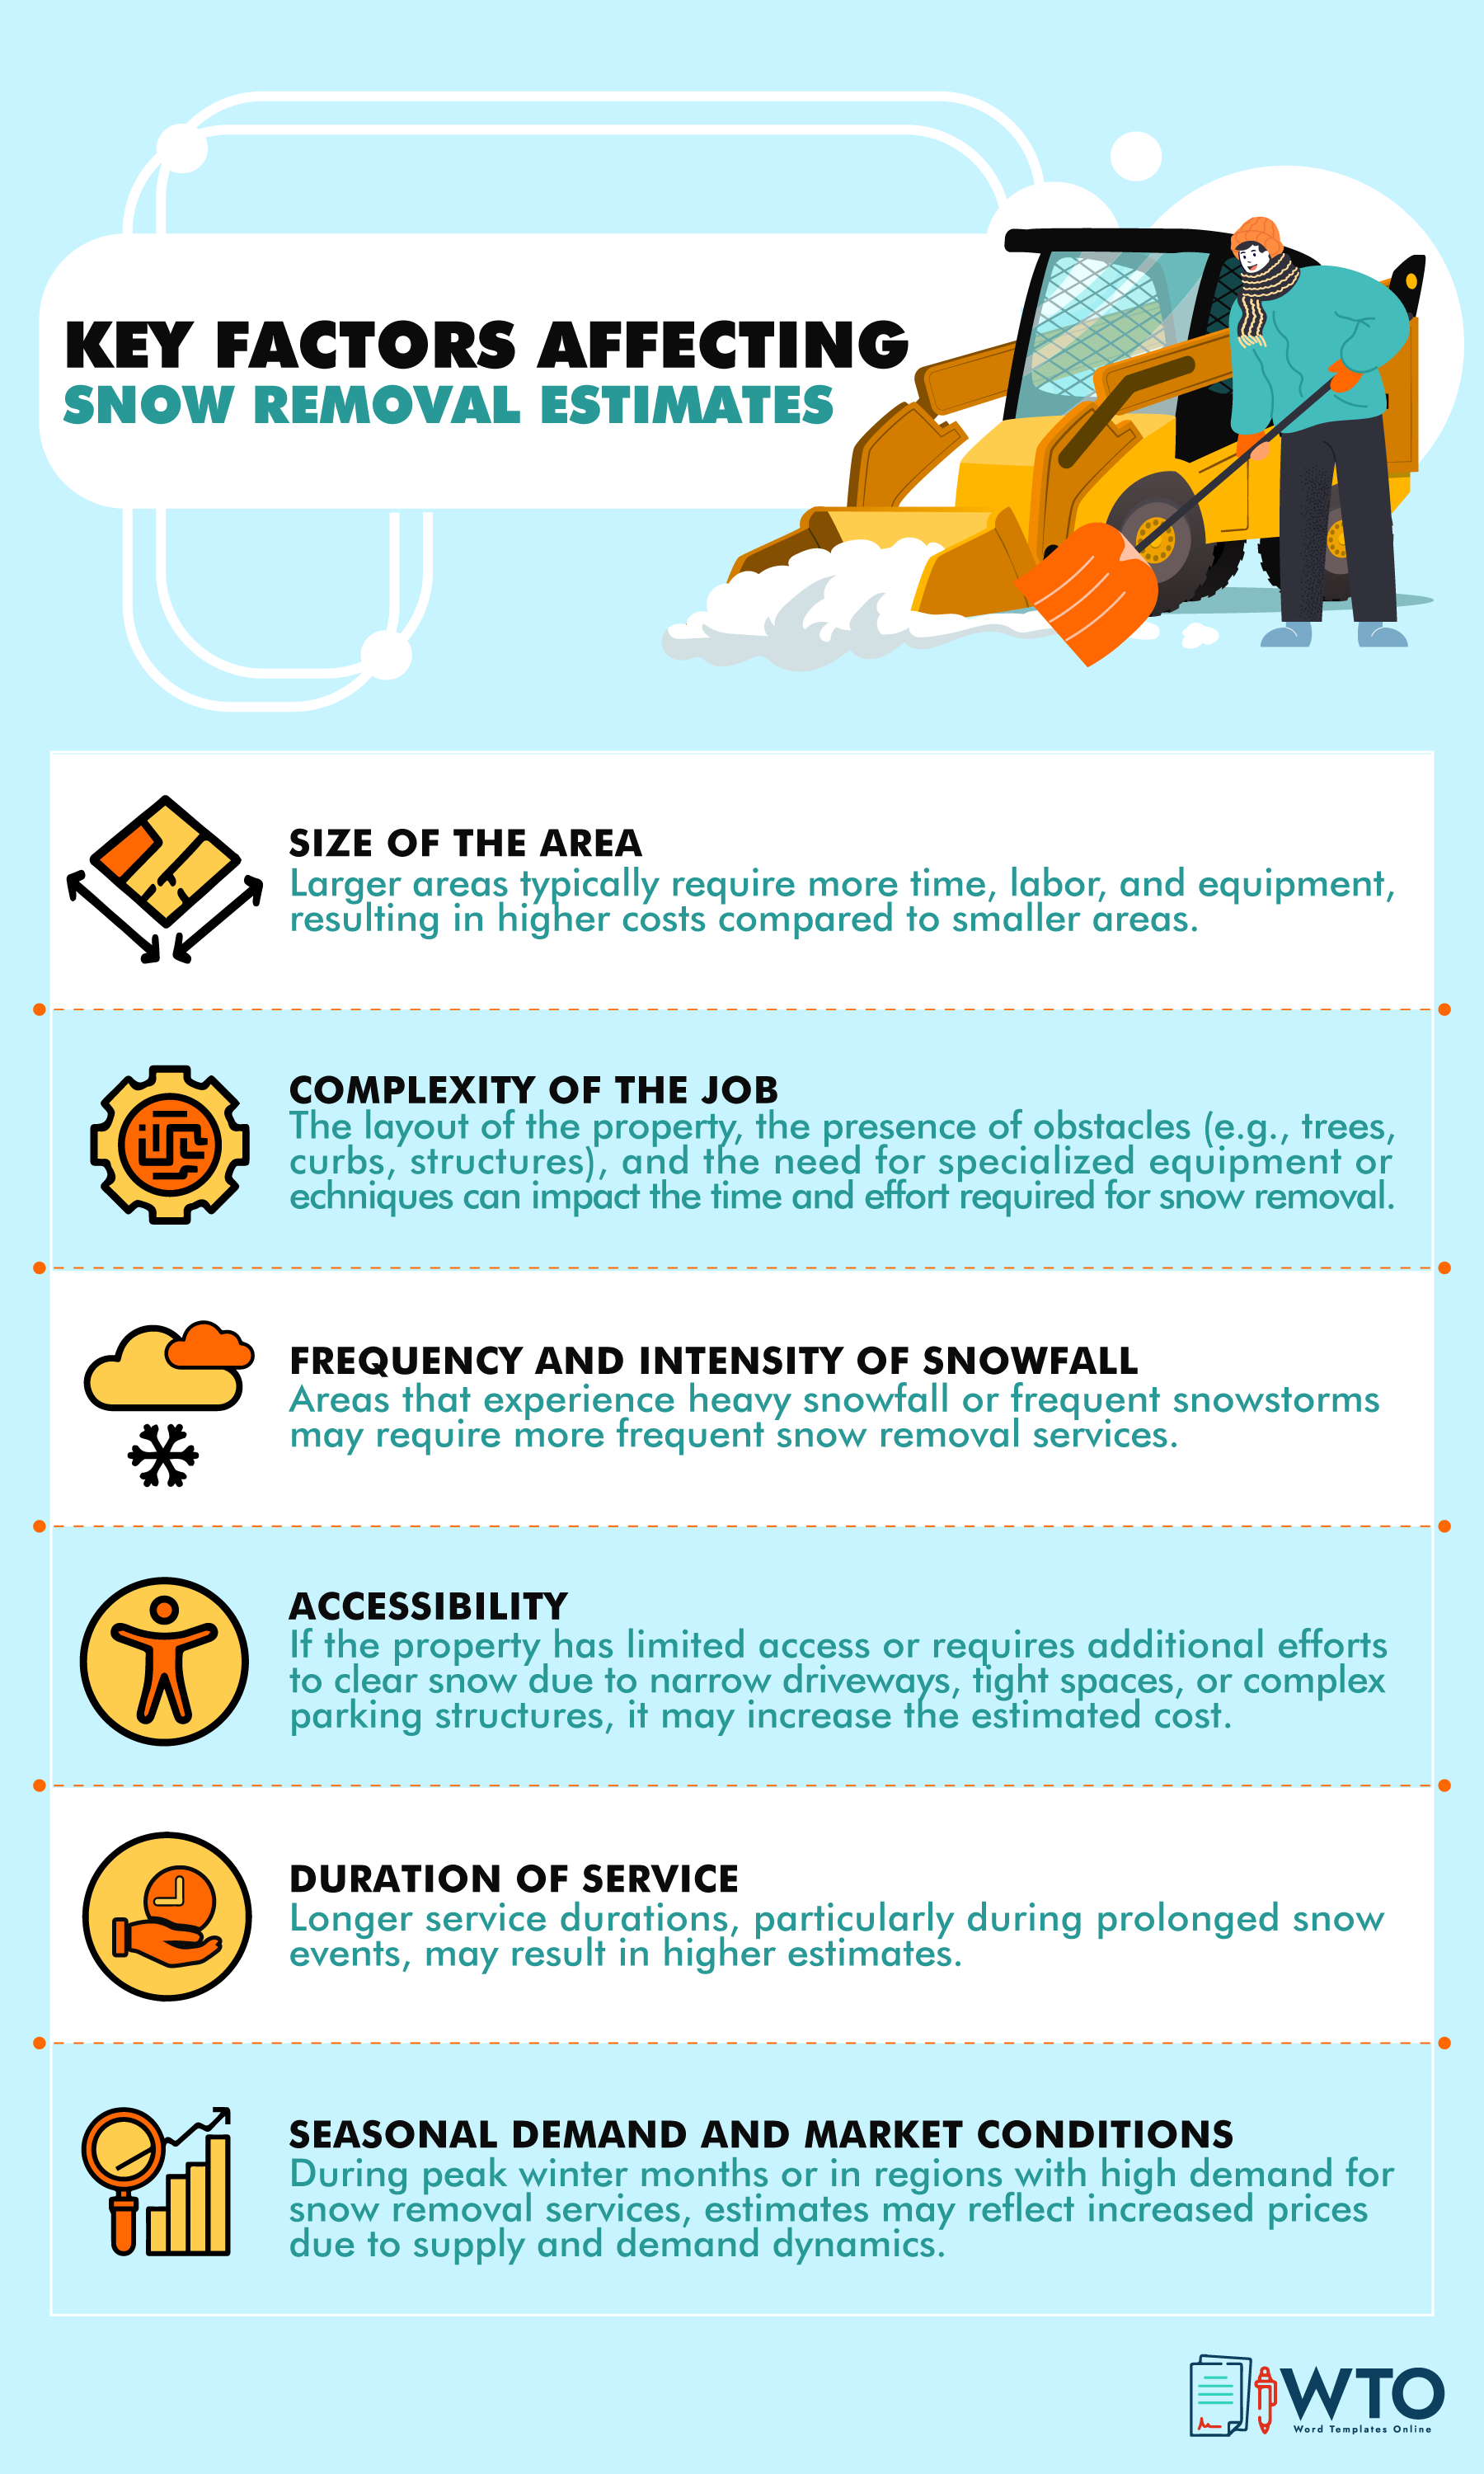 It is an infographic about the key factors affecting snow removal estimate.